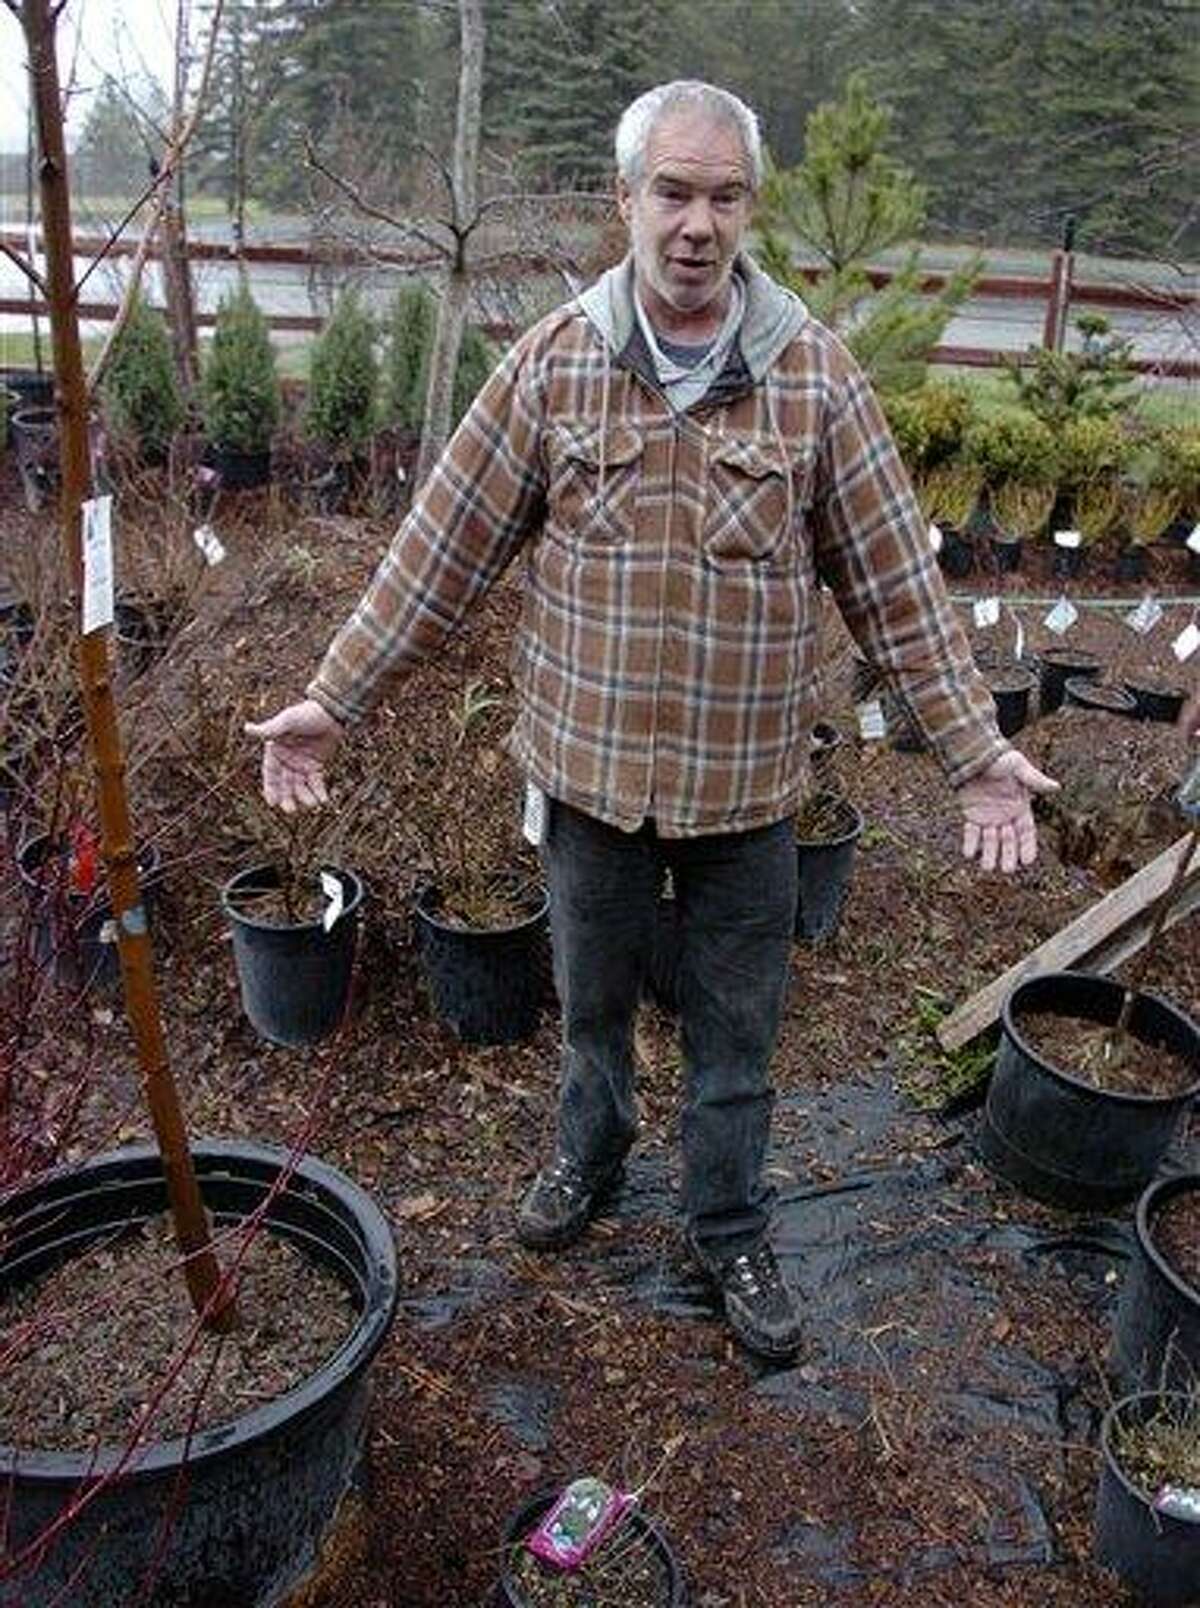 In this April 28, 2011 photo, landscaper Allen Olsen stands in his nursery in Libby, Mont., where he has used bark and wood chip potentially contaminated with lethal asbestos. More than 15,000 tons of the material have been sold, used in and trucked out of the remote Montana town of 3,000 people over the last decade, with unknown risks to public health. (AP Photo/Matthew Brown)